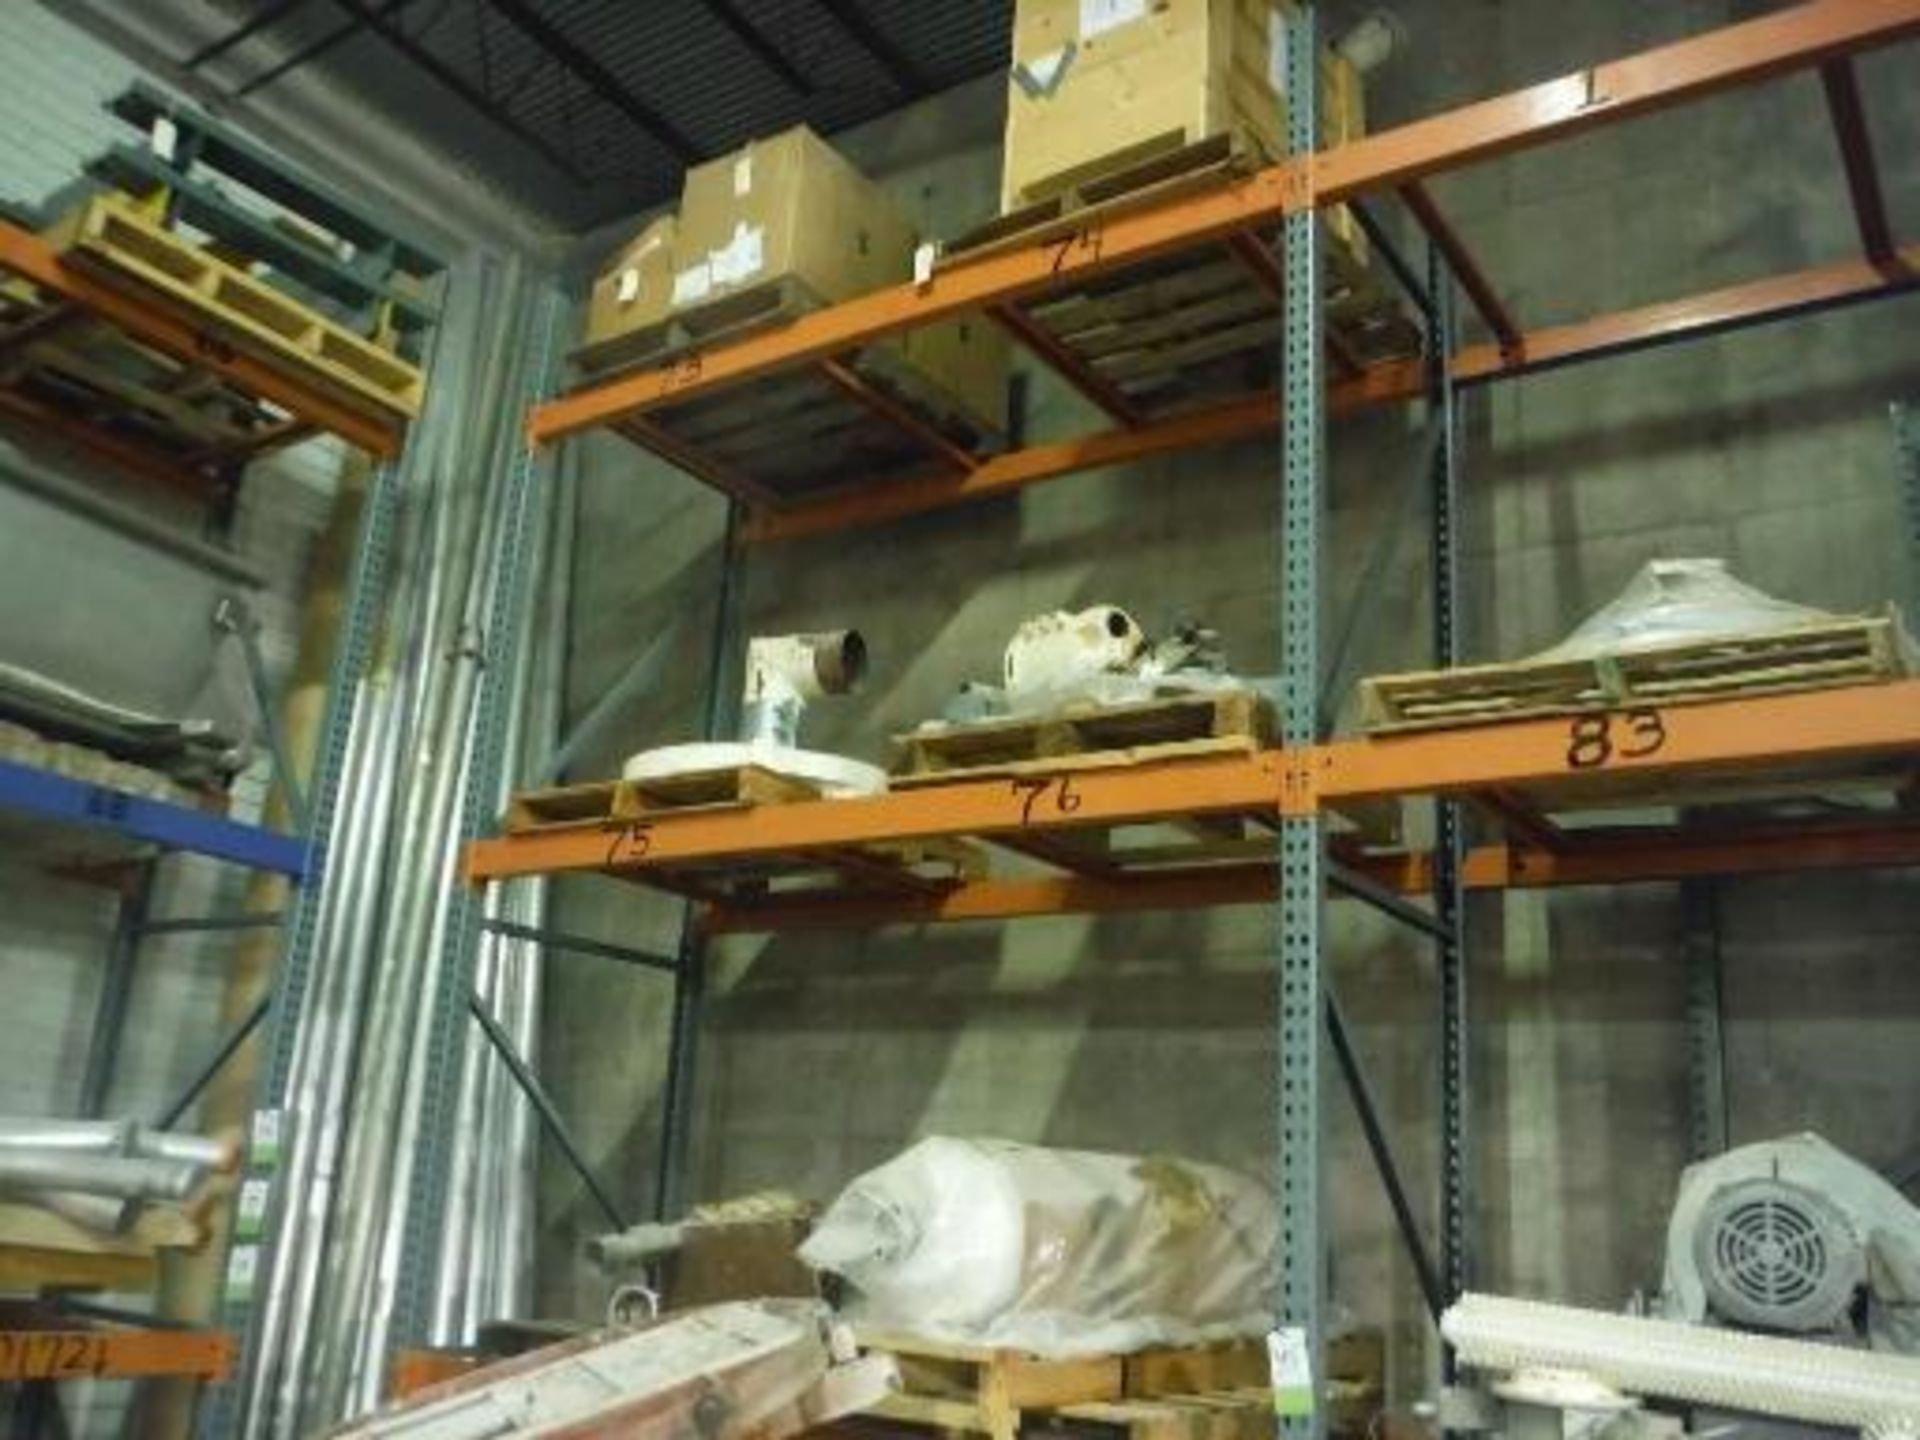 Contents of Rack Top to Bottom (pallet slot 73-80), (2) Cyclones, miscellaneous pipe, and